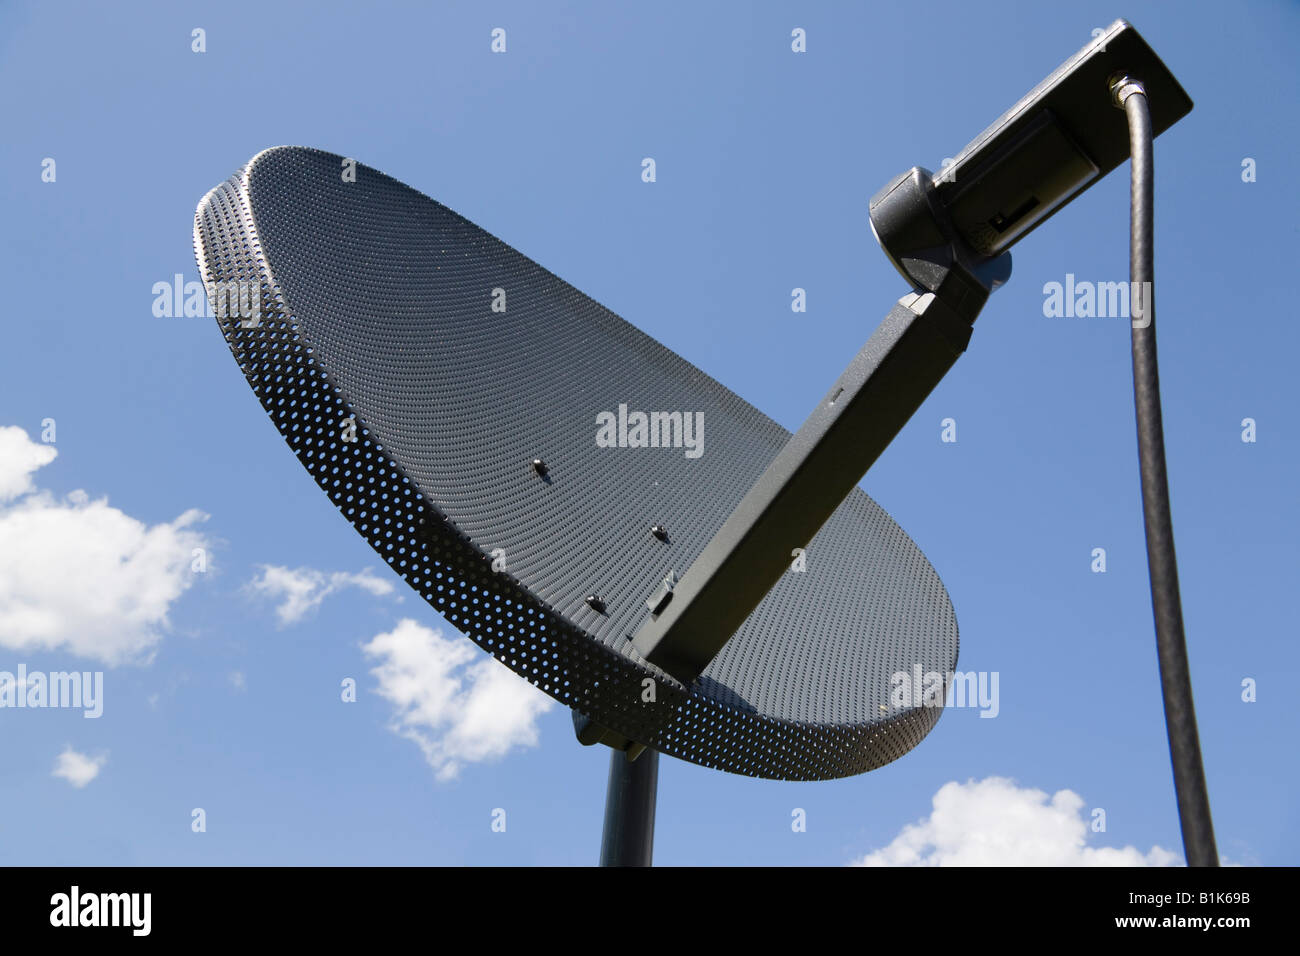 Britain UK Small domestic household satellite dish mounted on pole against blue sky in close up Stock Photo